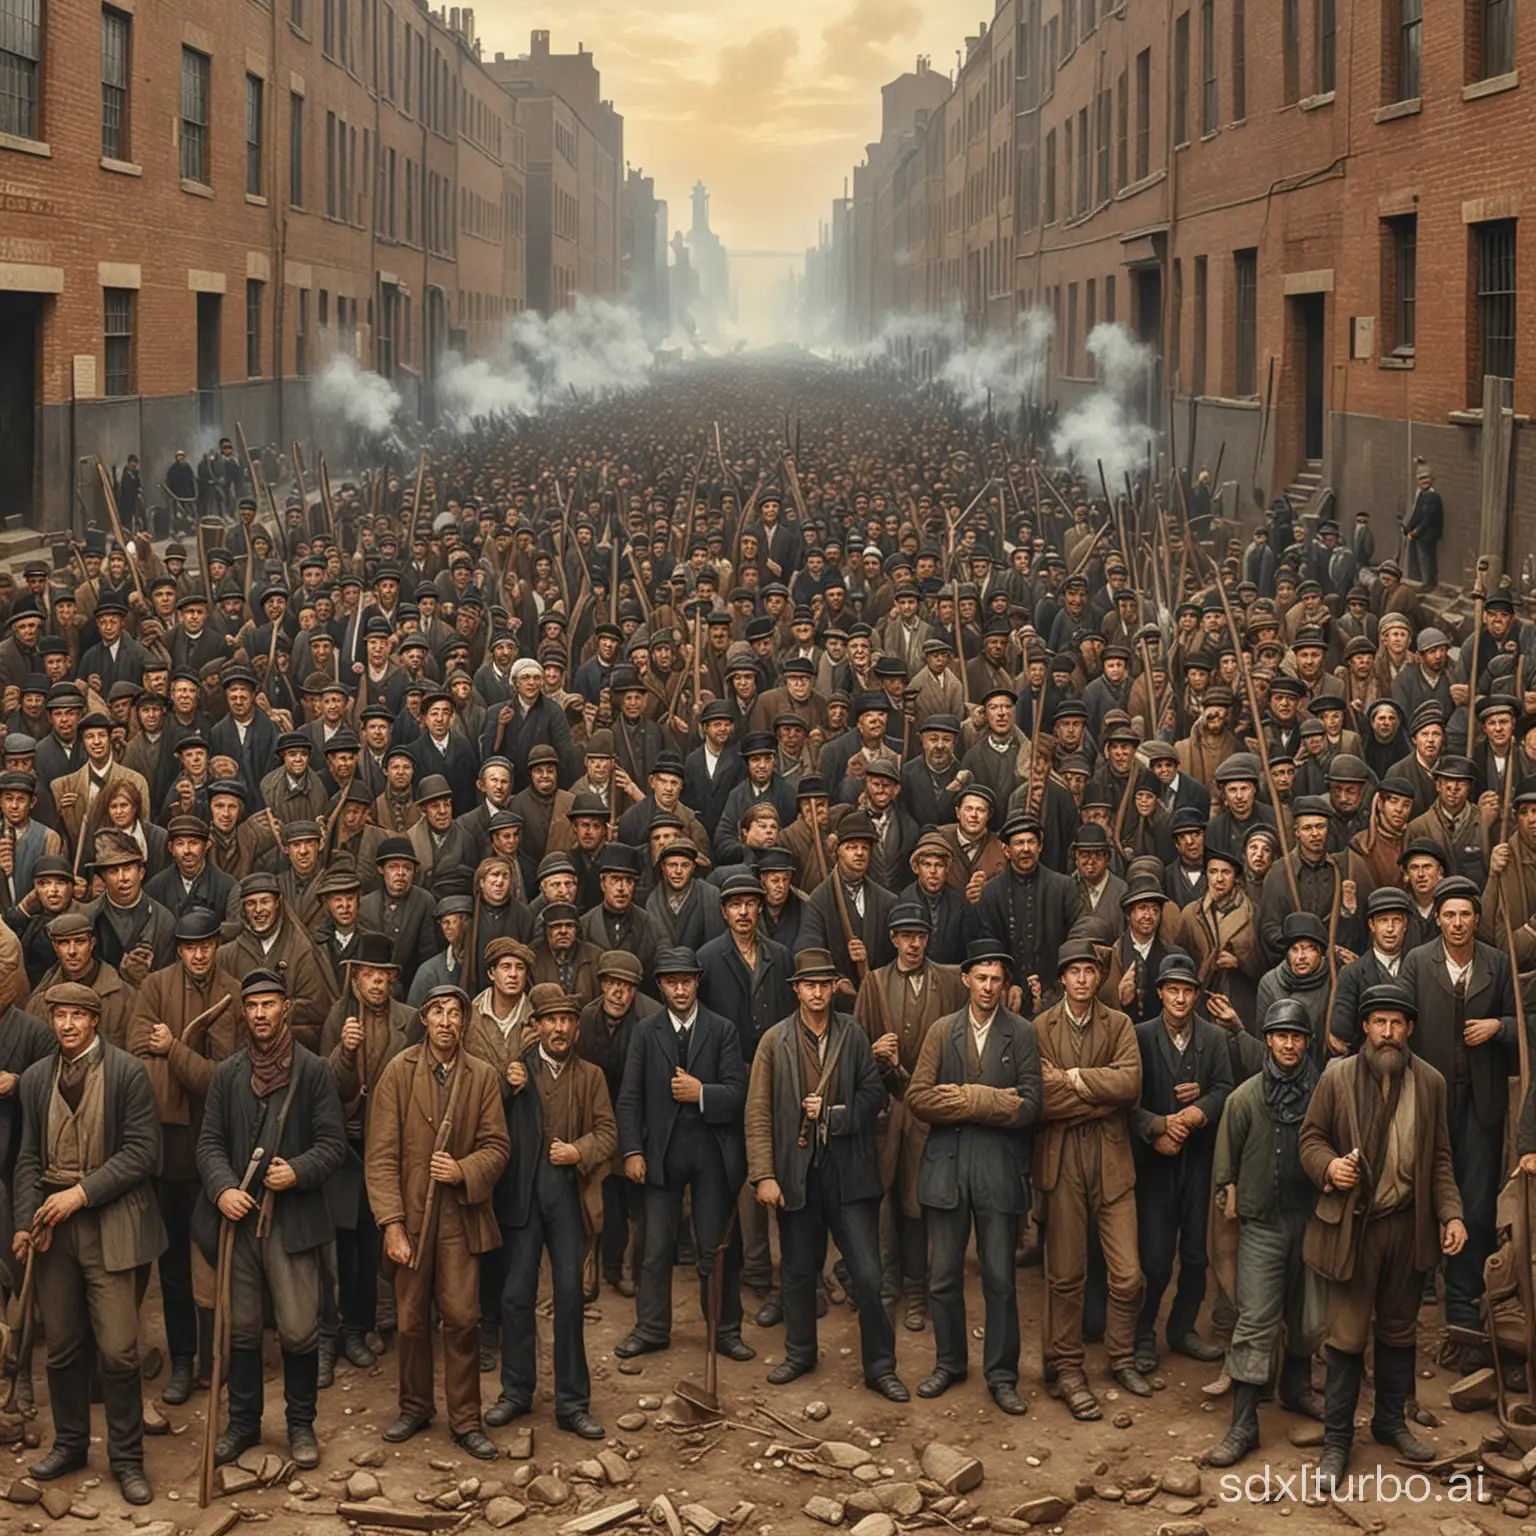 Workers-Uprising-During-the-Industrial-Revolution